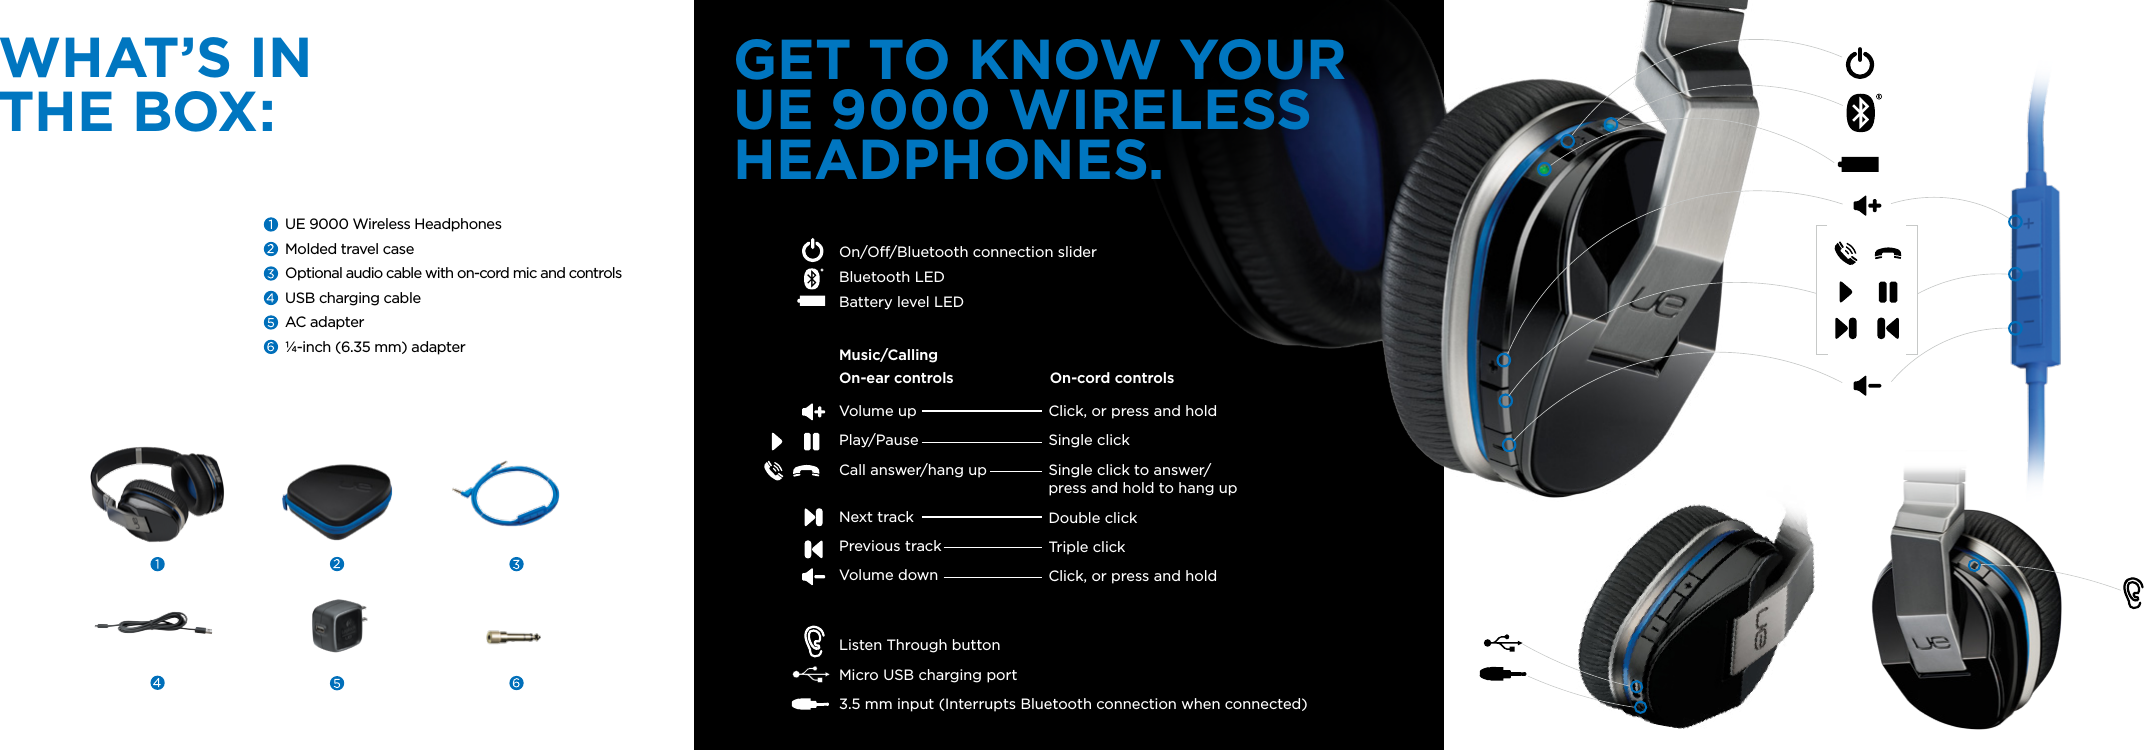 GET TO KNOW YOUR UE 9000 WIRELESS HEADPHONES.UE 9000 Wireless HeadphonesMolded travel caseOptional audio cable with on-cord mic and controlsUSB charging cableAC adapter¼-inch (6.35 mm) adapterWHAT’S IN THE BOX:Volume upPlay/PauseCall answer/hang up Next trackPrevious trackVolume downListen Through button Micro USB charging port3.5 mm input (Interrupts Bluetooth connection when connected)On/O/Bluetooth connection slider Bluetooth LEDBattery level LED Click, or press and holdSingle clickSingle click to answer/ press and hold to hang upDouble click Triple click Click, or press and holdMusic/CallingOn-ear controls On-cord controls